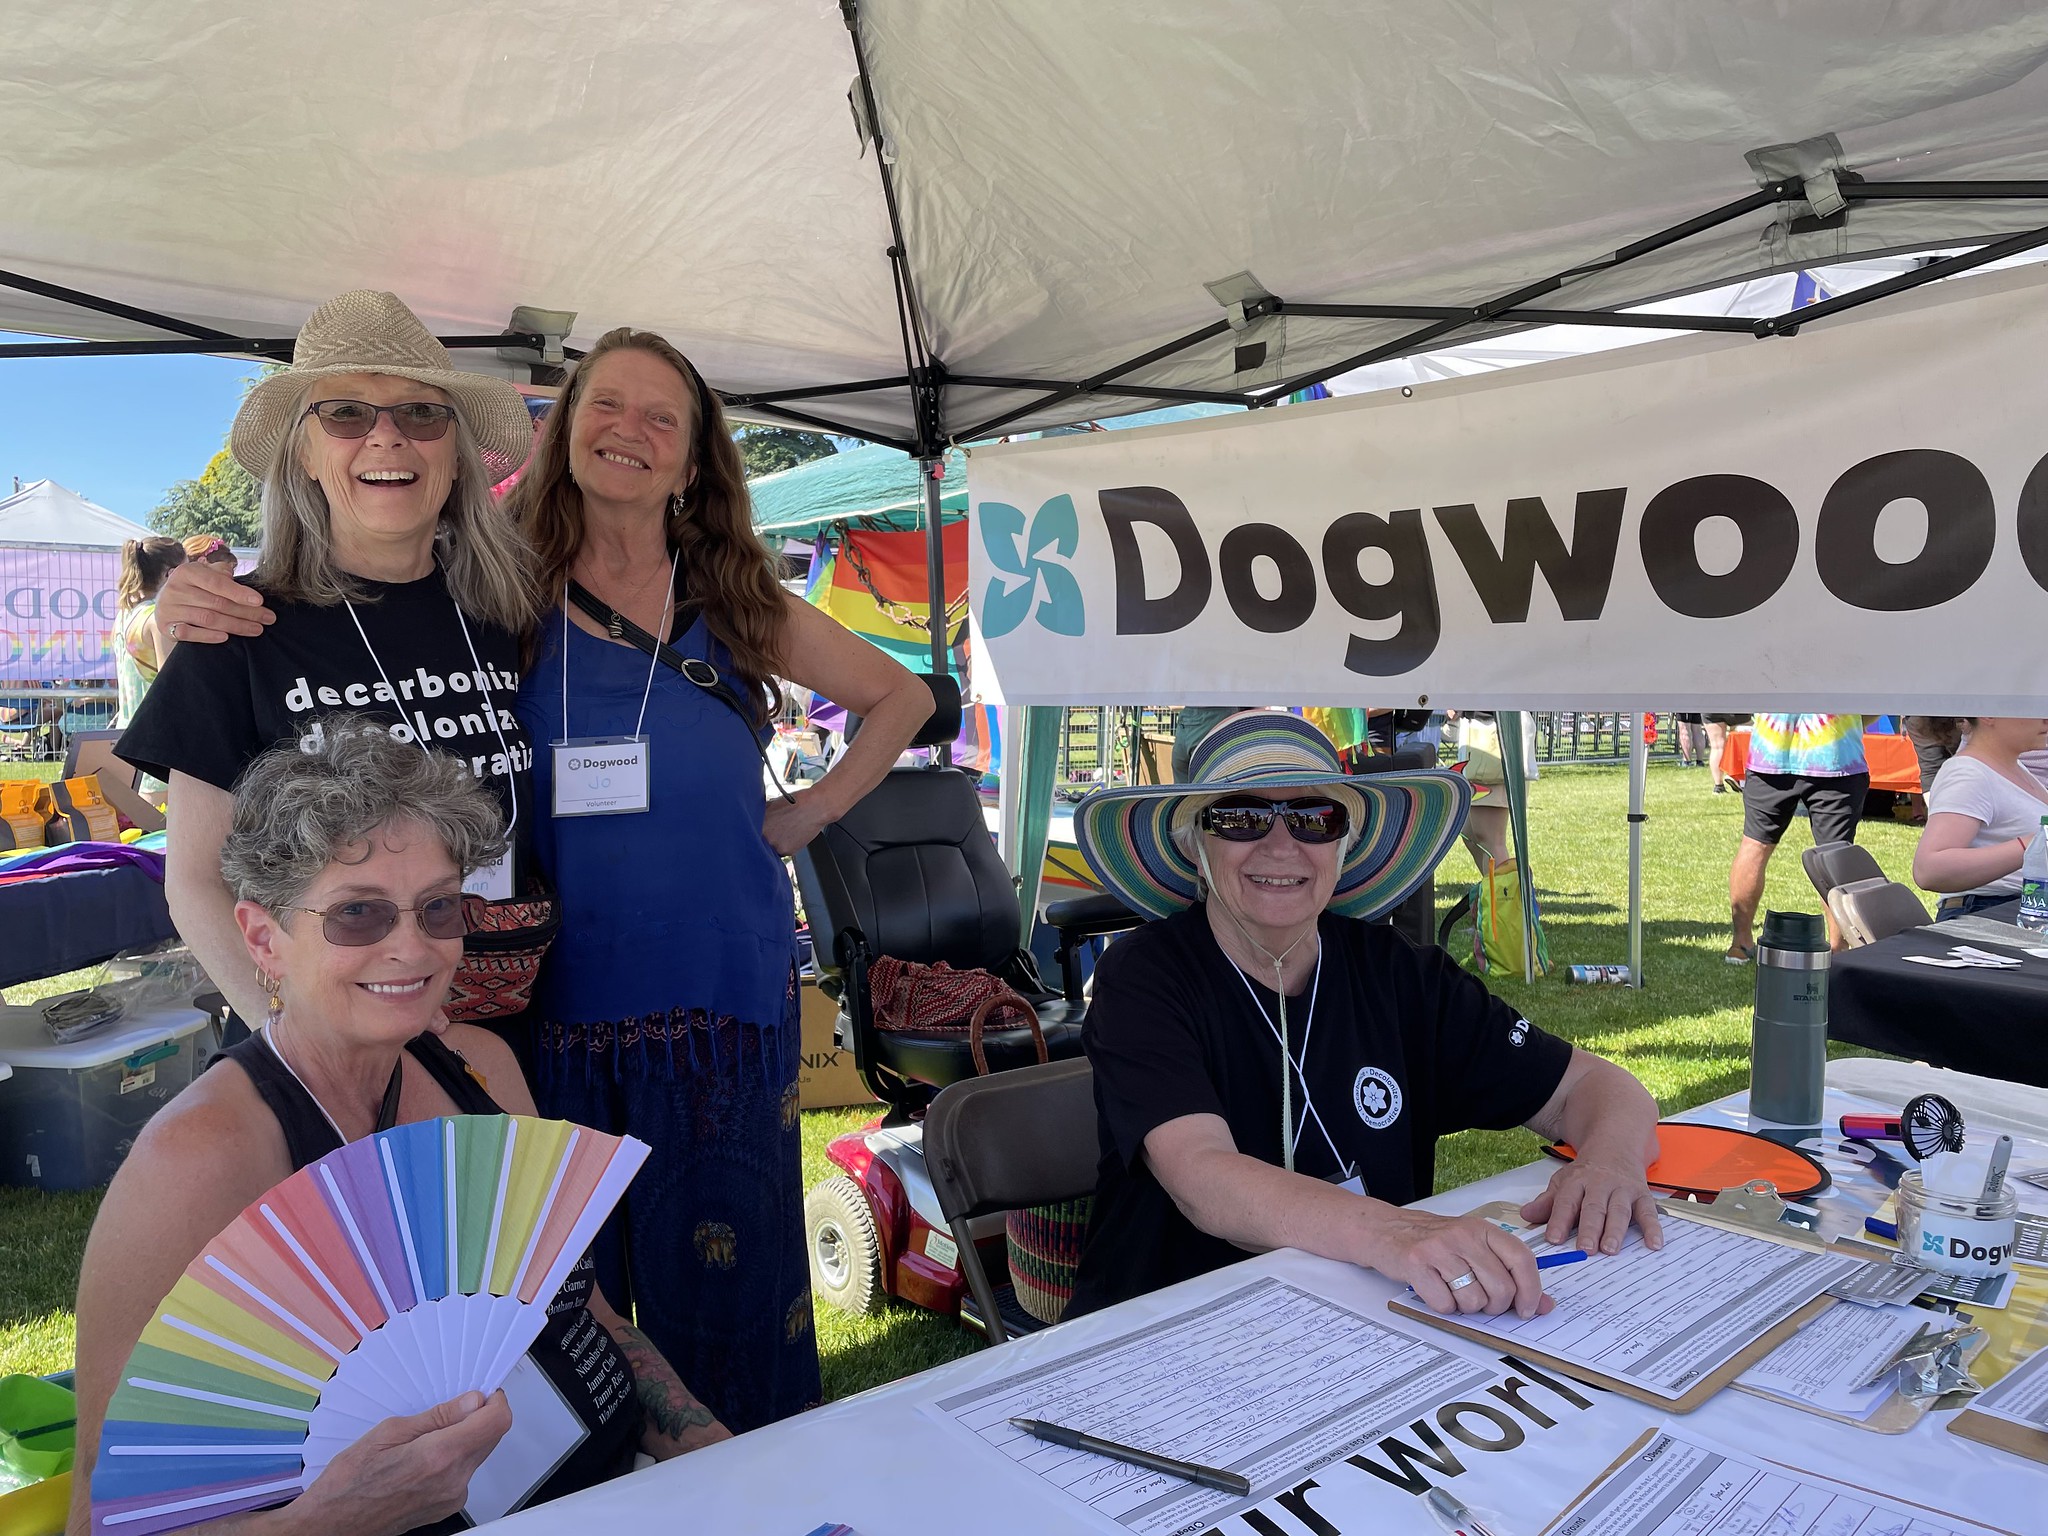 Four people smiling for the camera, two sitting and two standing, behind a table with petition clipboards all across and a banner that says "Dogwood" hanging from the pop up tent overtop of them all.